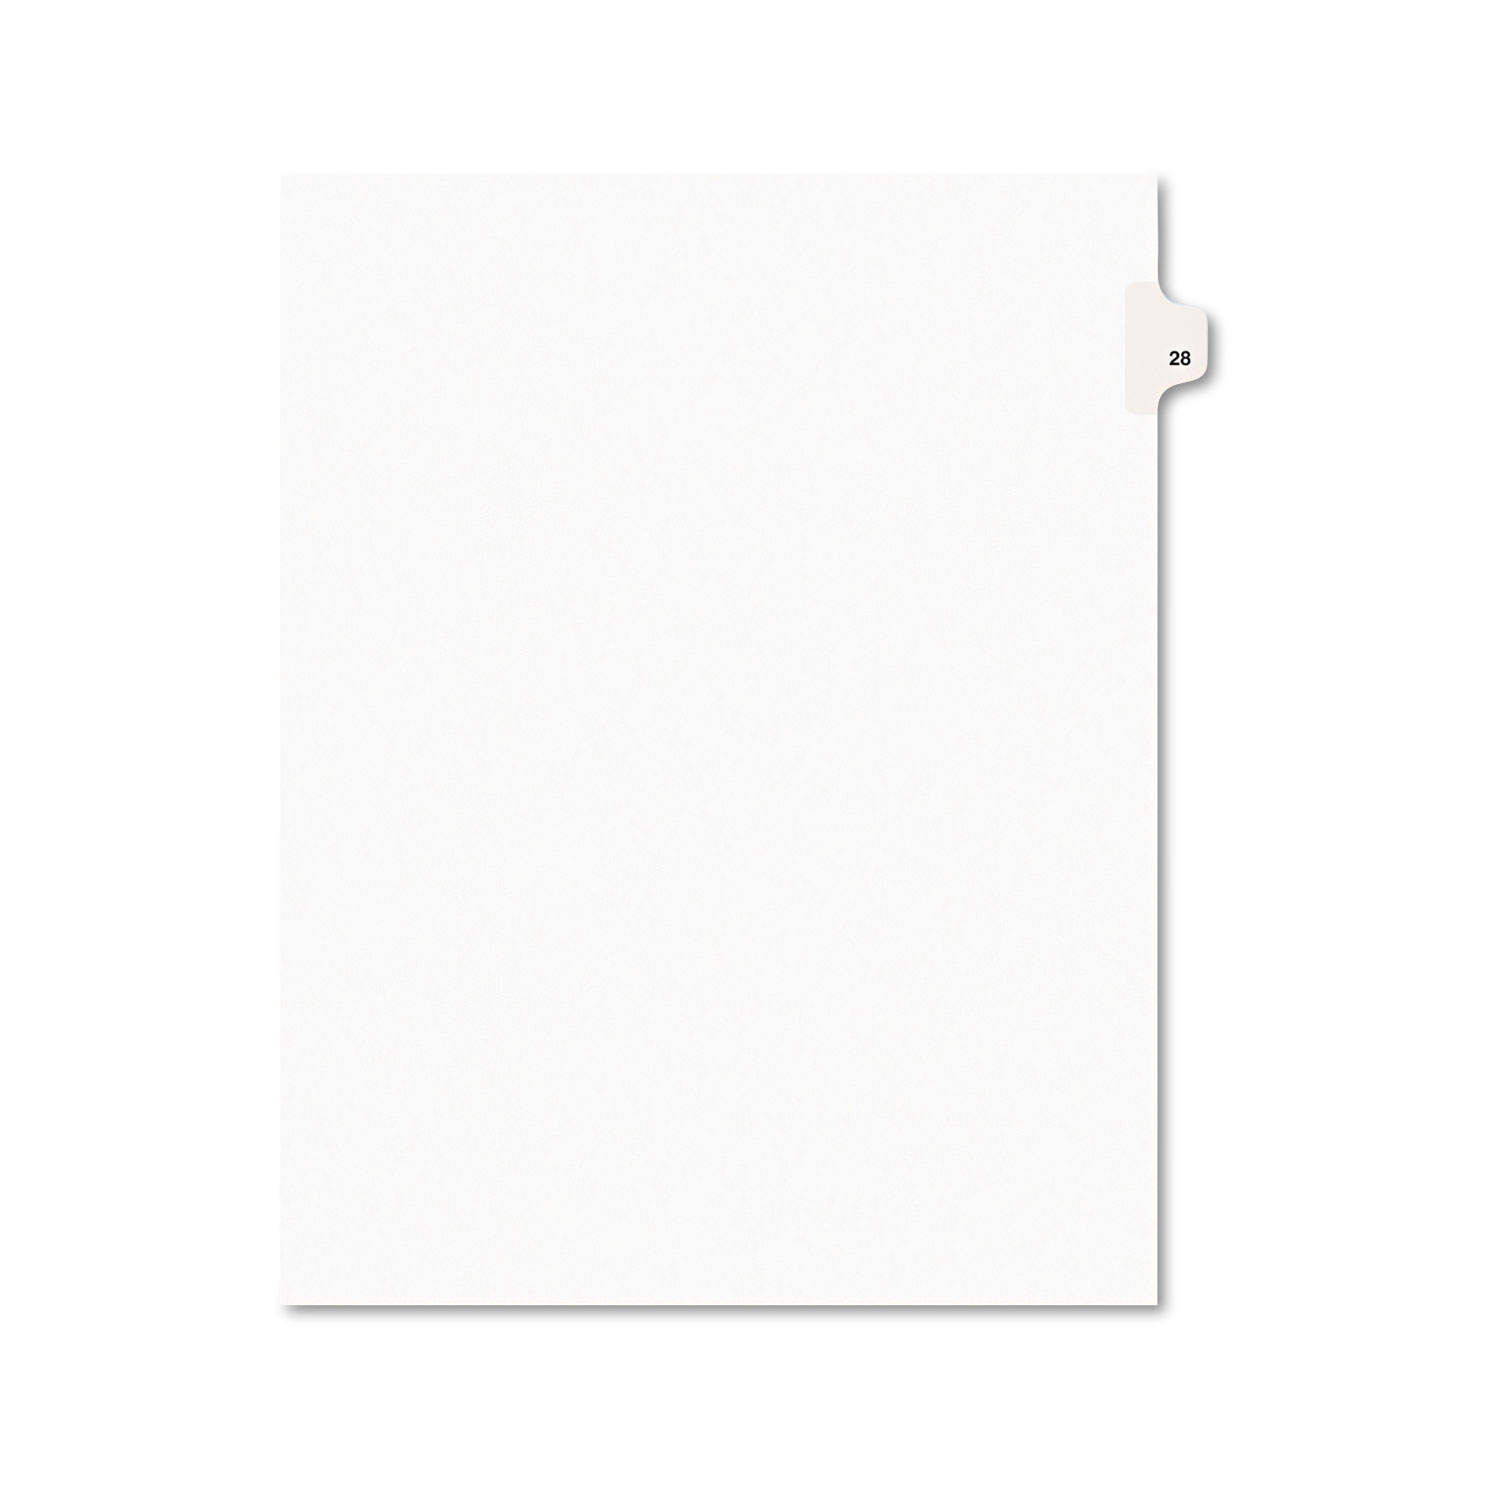  Avery 01028 Preprinted Legal Exhibit Side Tab Index Dividers, Avery Style, 10-Tab, 28, 11 x 8.5, White, 25/Pack (AVE01028) 